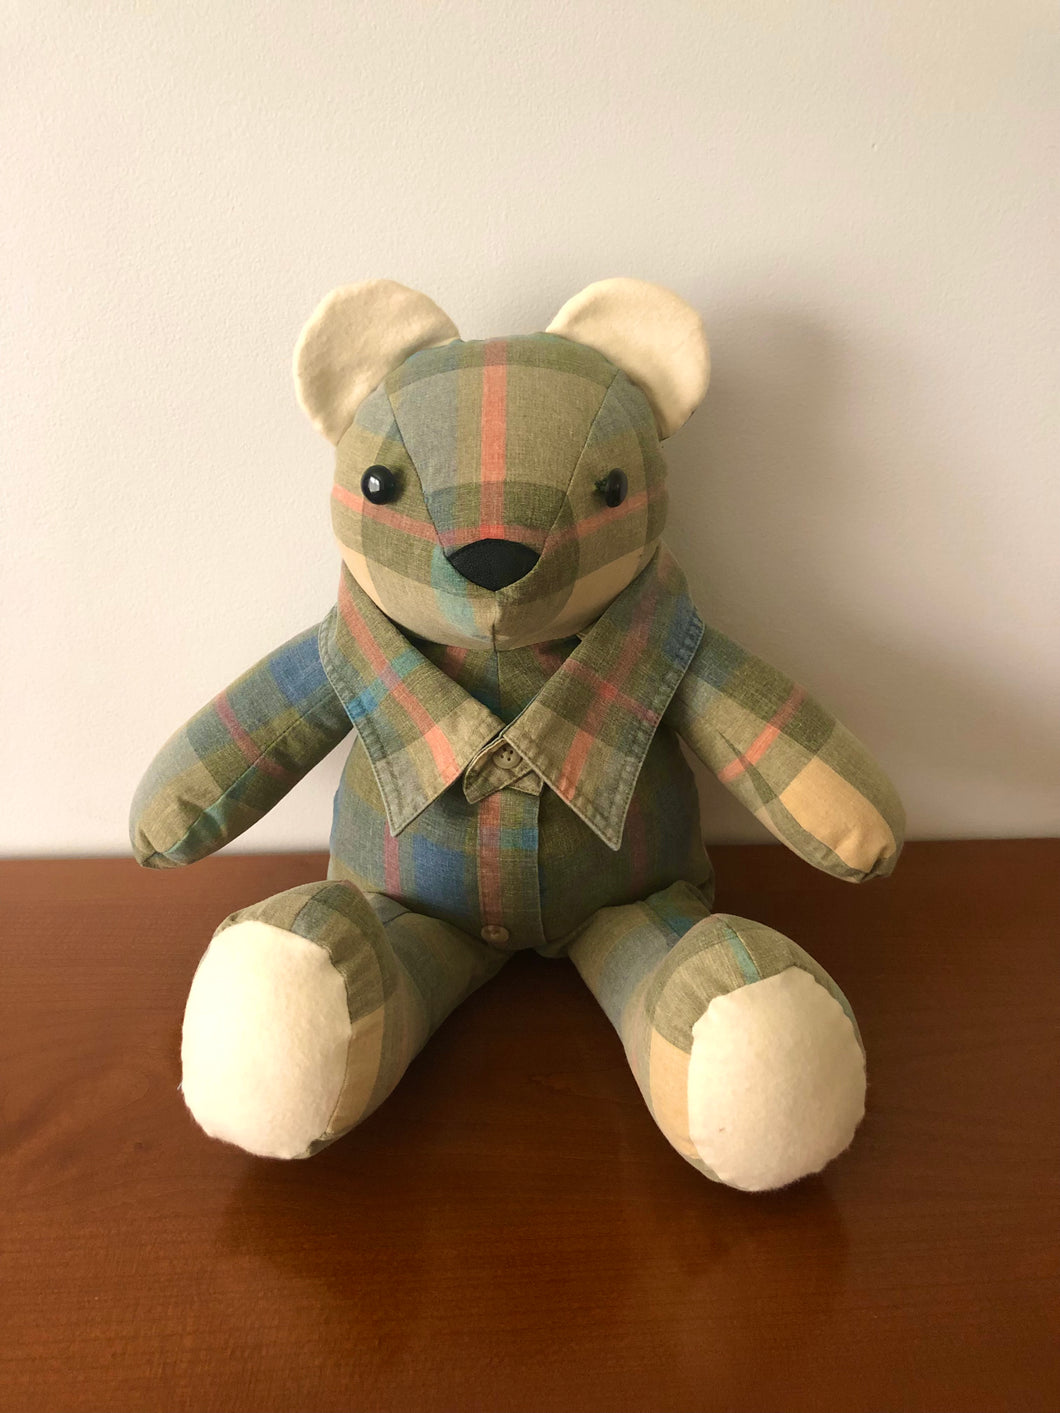 Handmade Stuffed Memory Teddy Bear- with your own materials